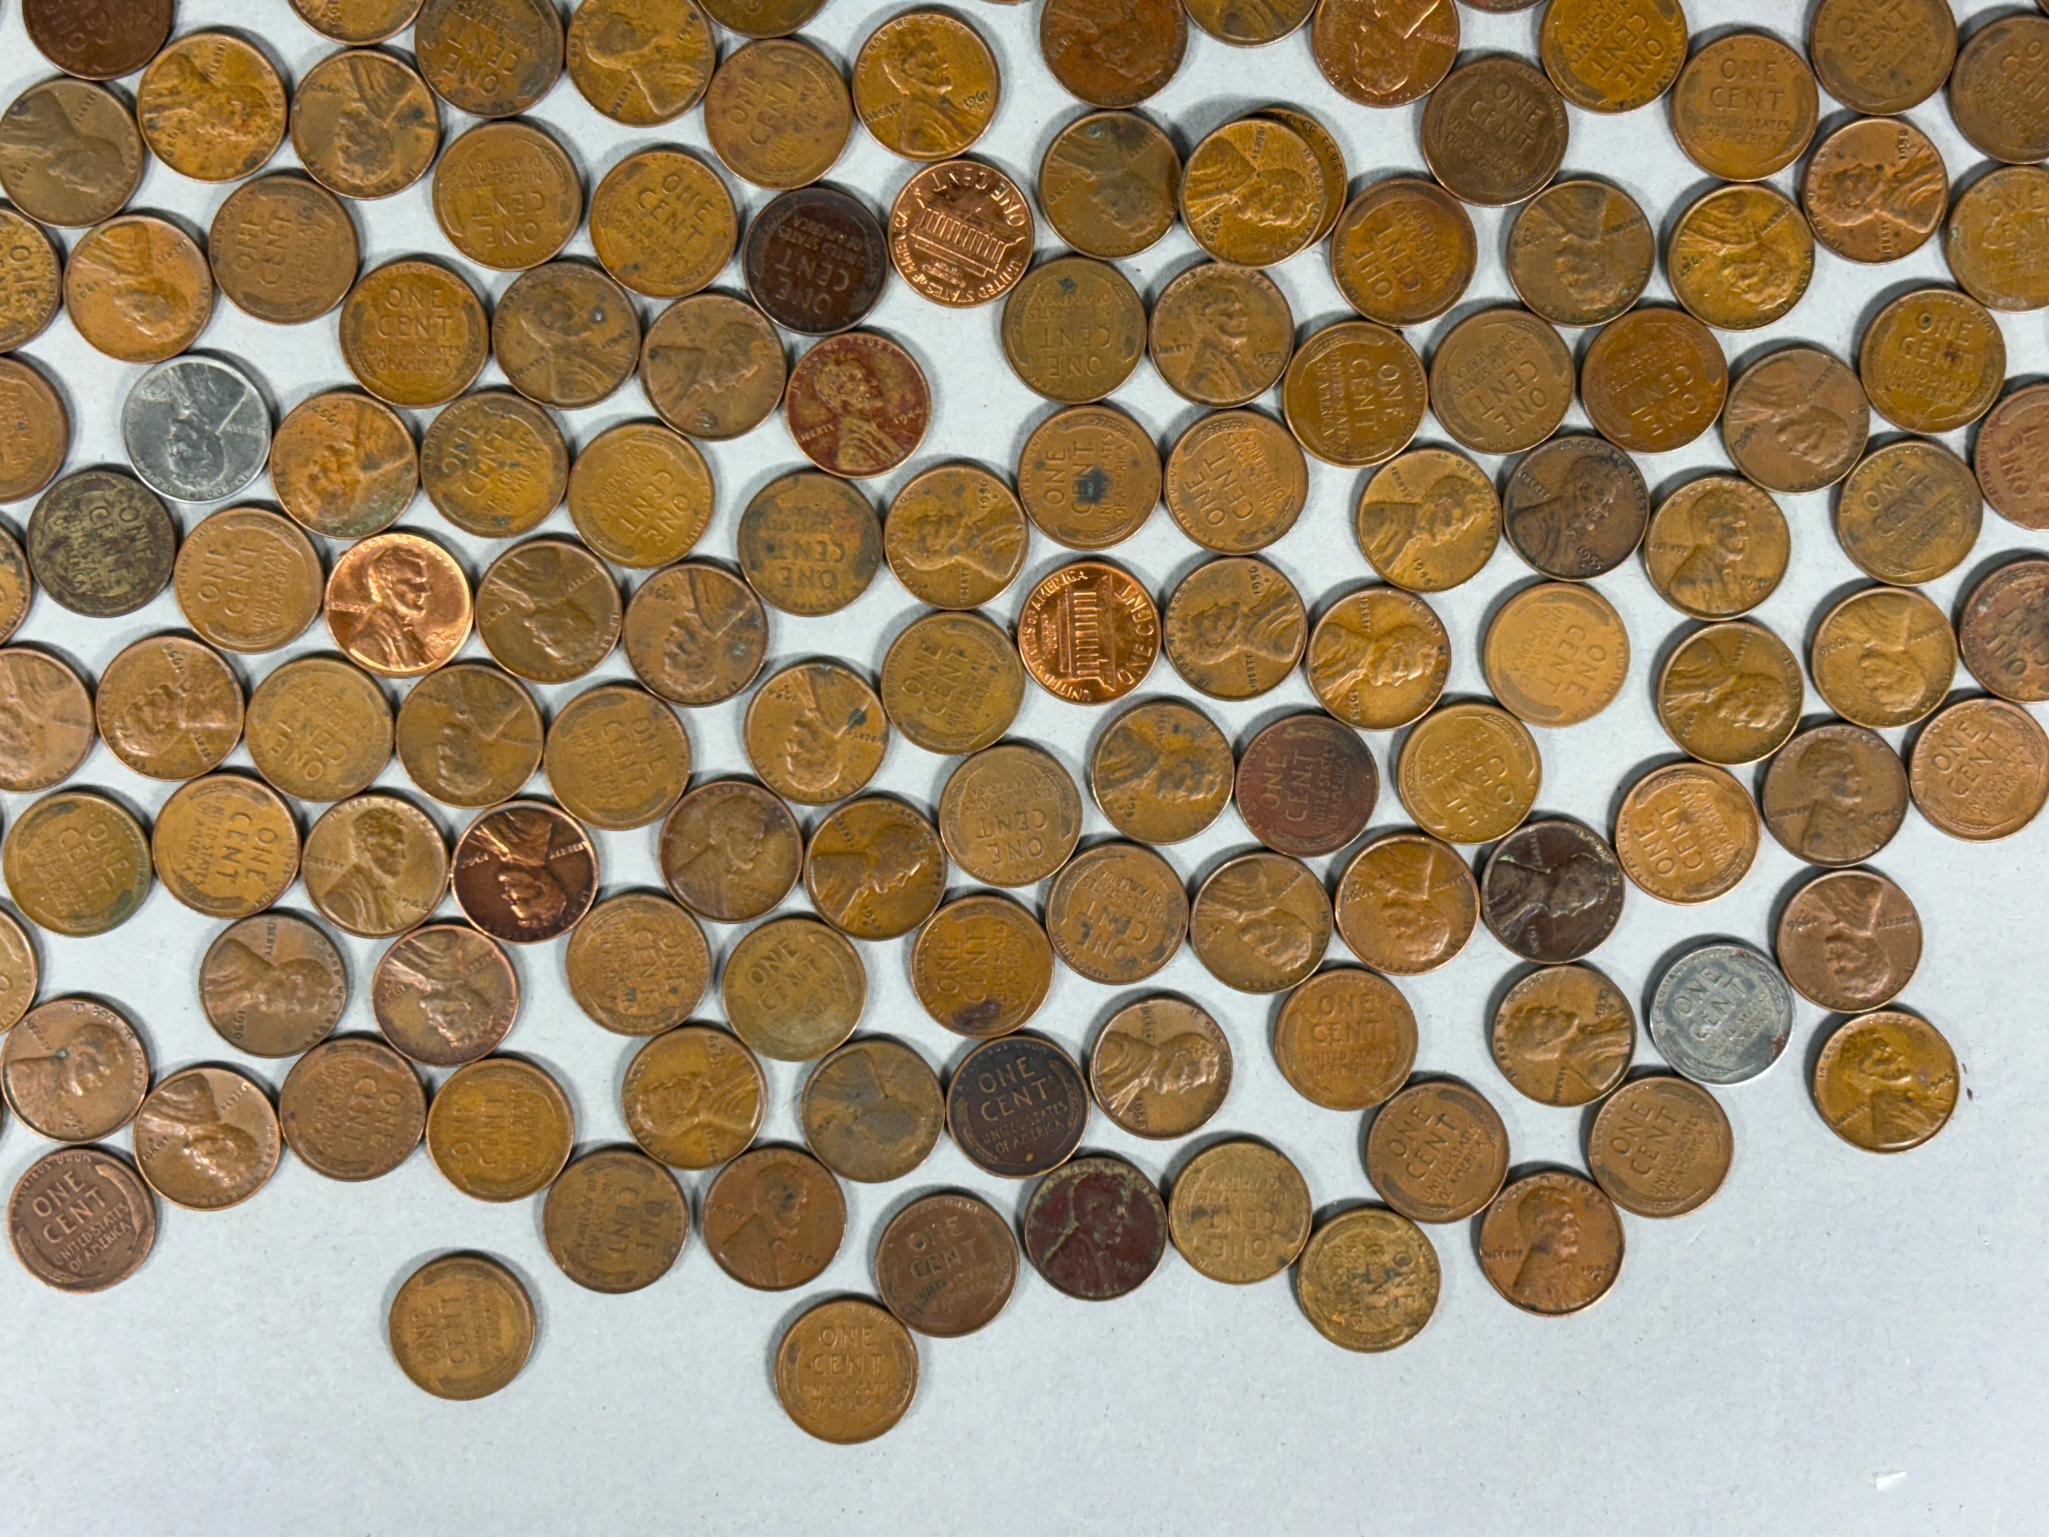 Large Lot of Old Pennies Many Wheat